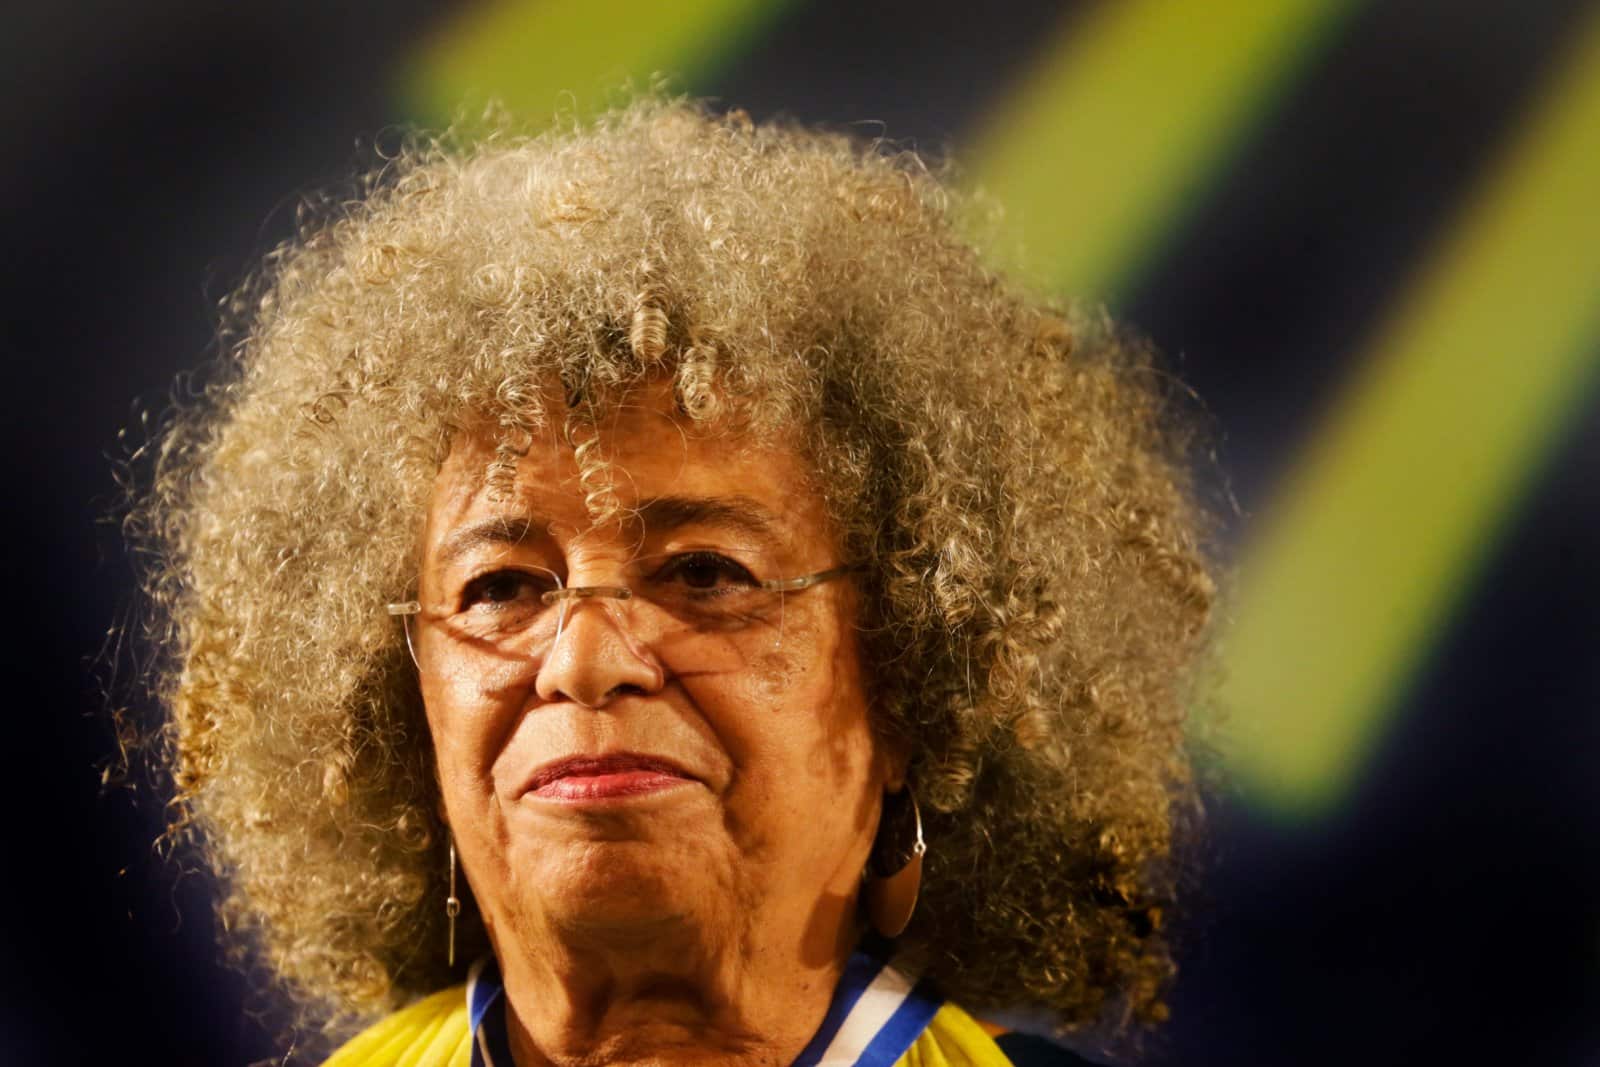 Image Credit: Shutterstock / Antonio Scorza <p><span>The renowned activist and scholar, Angela Davis, came out as a lesbian in the 1990s, linking her LGBTQ+ identity with her activism.</span></p>